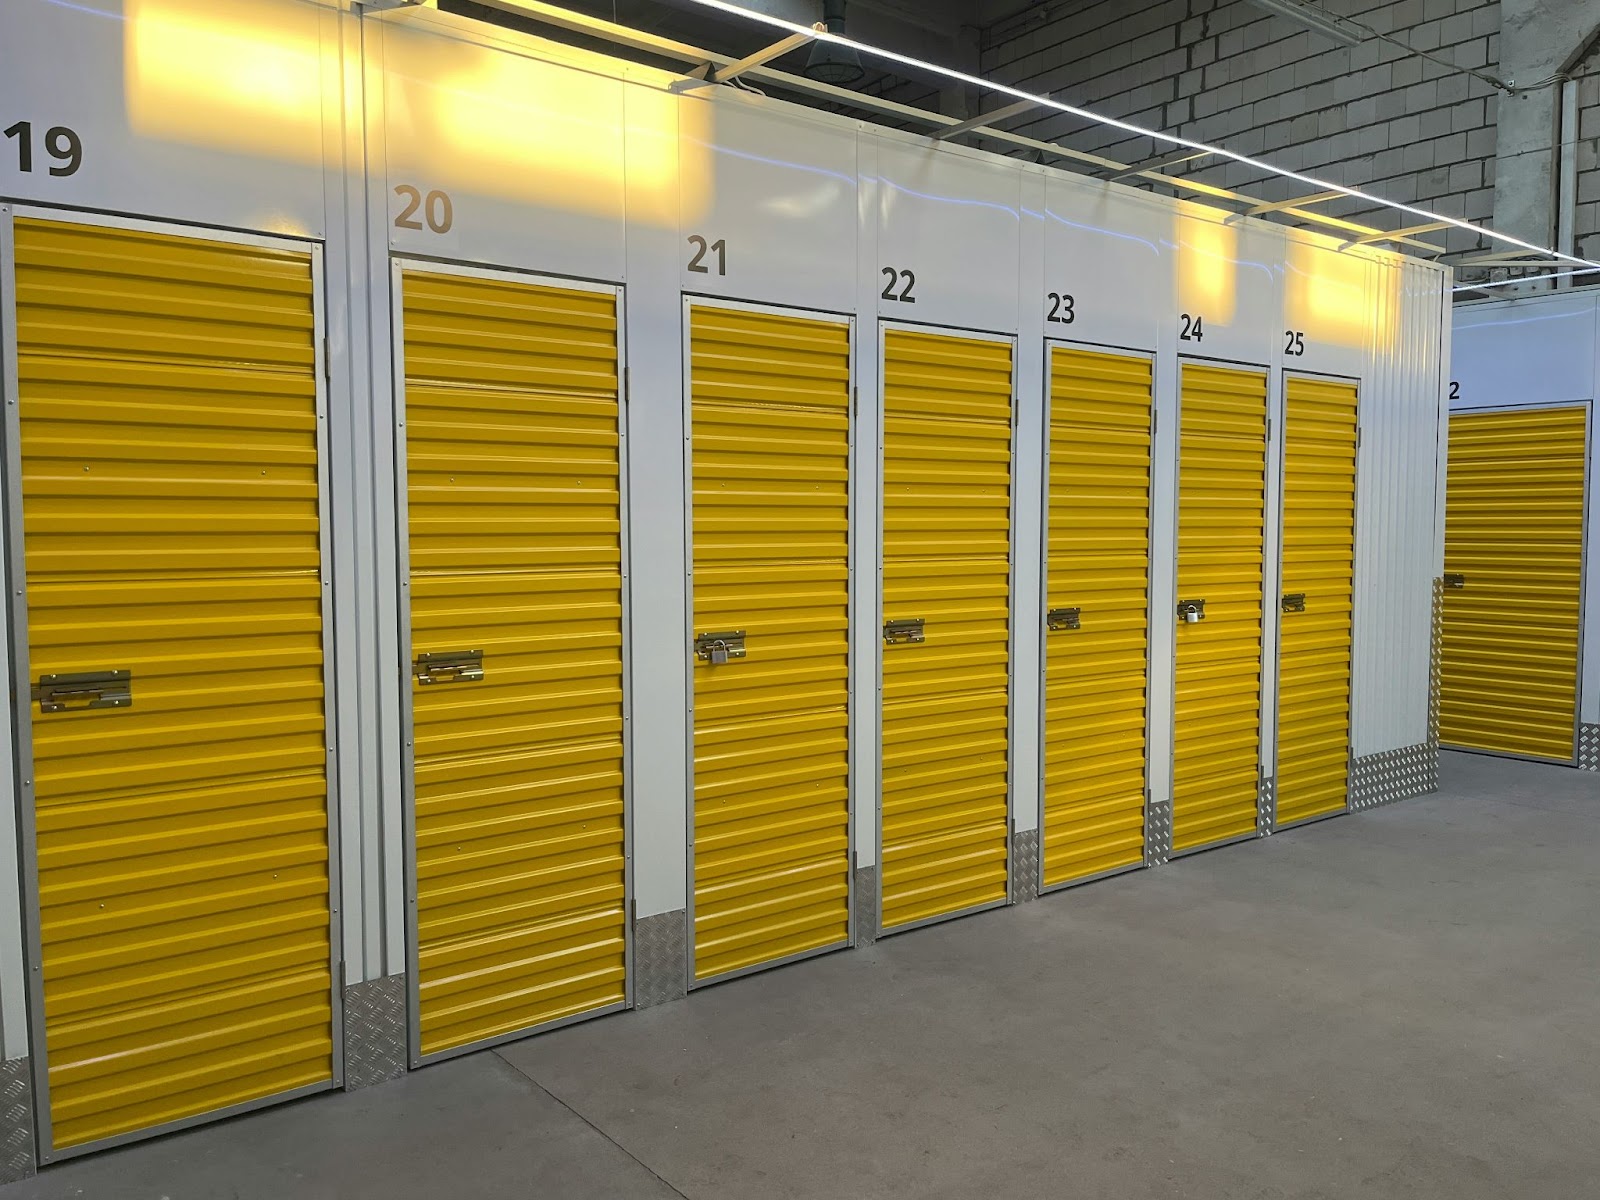 Several large lockers in a self-storage facility.